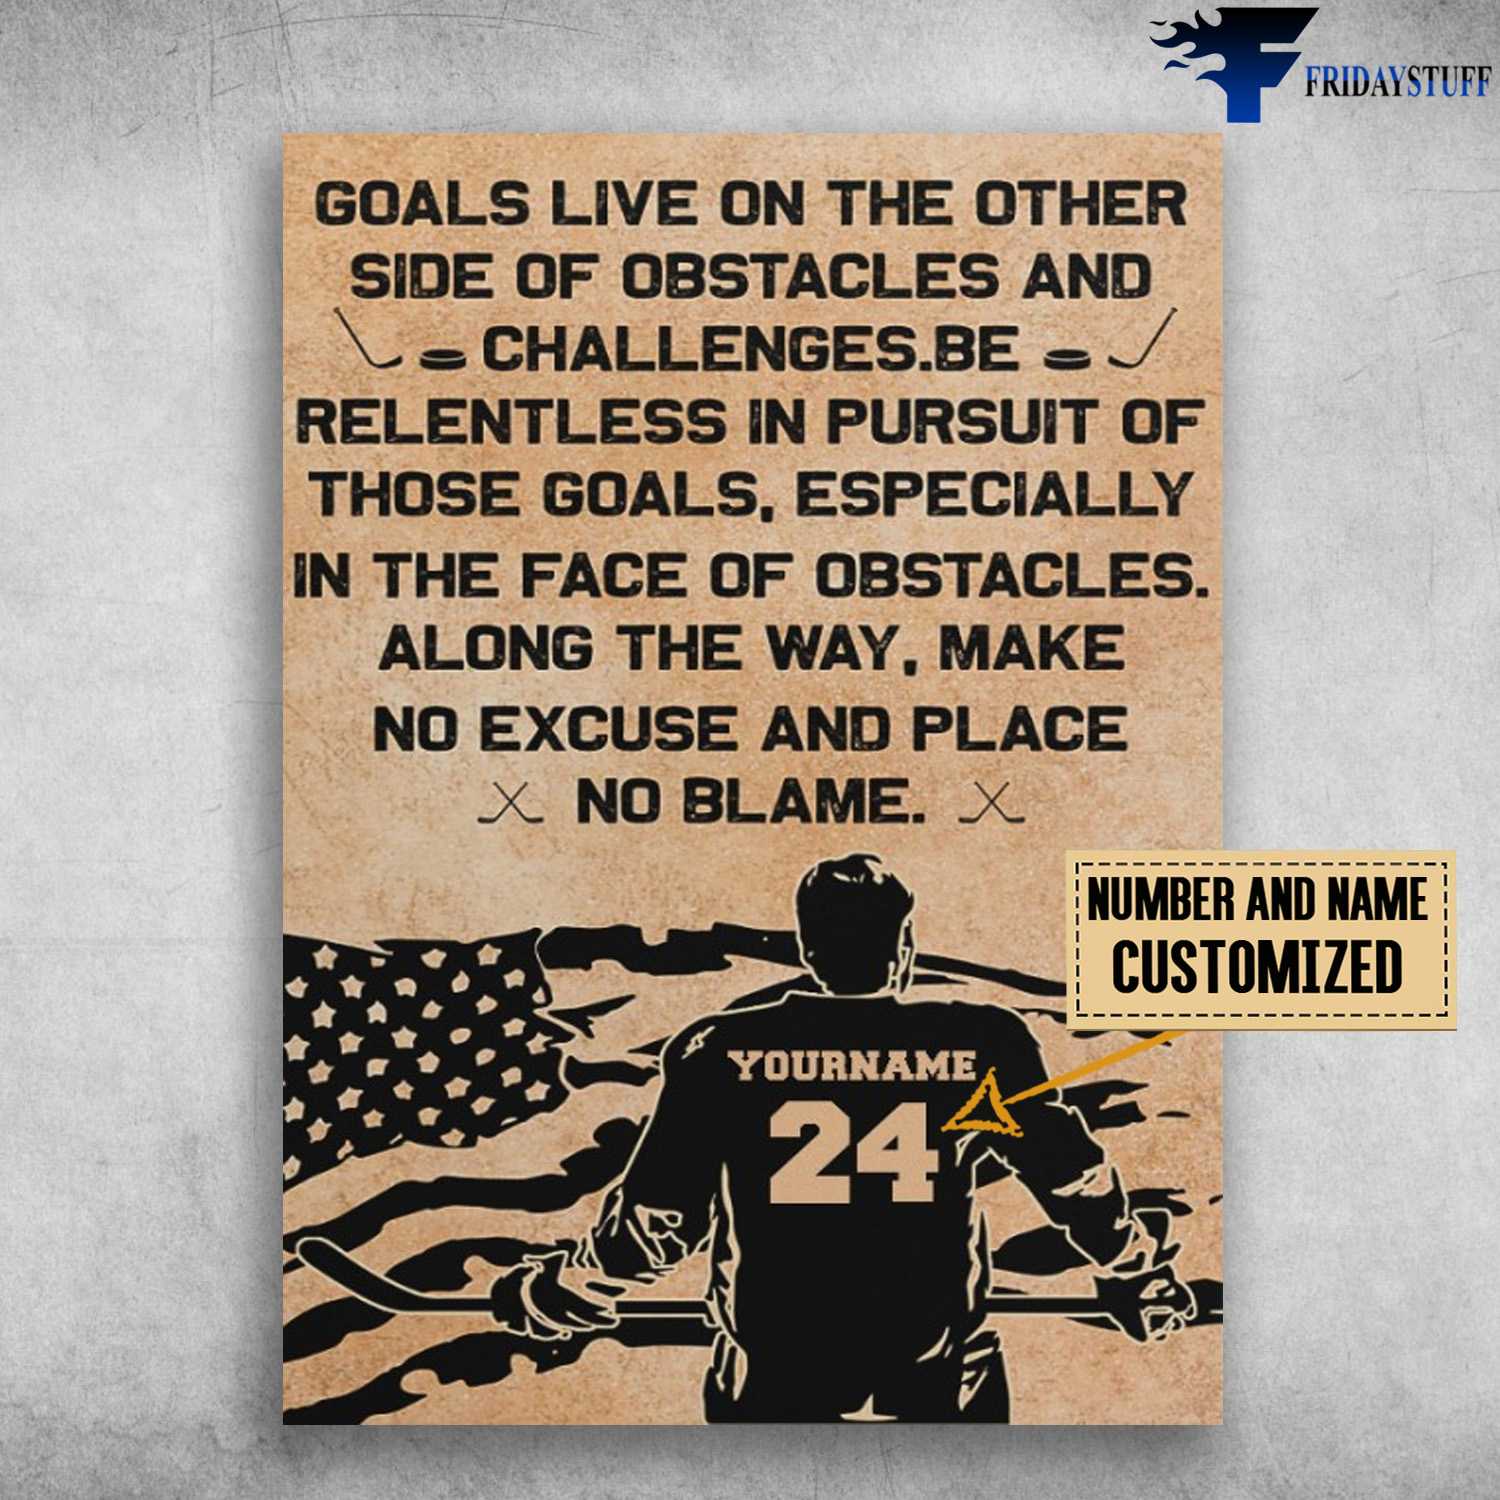 Hockey Player, American Hockey, Goals Live On The Other, Side Of Obstacles And Challenges, Be Relentless In Pursuit Of Those Goals, Especially, In The Face Of Obstacles, Along The Way